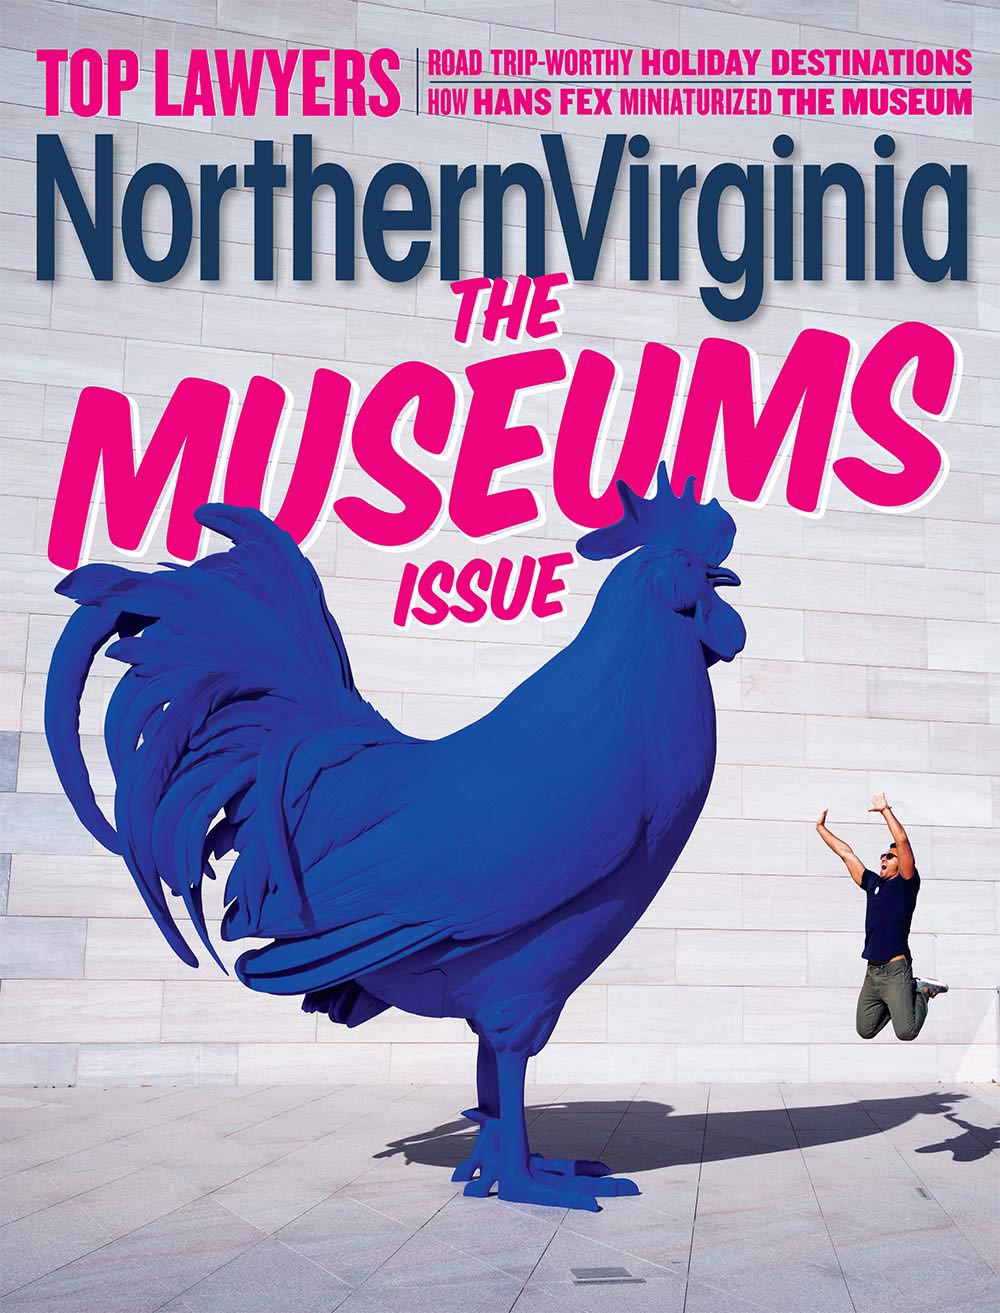 Northern Virginia Magazine December 2019, museum guide, washington dc, national gallery of art, nga, Katharina Frithsch's Hahn/Cock, blue rooster, rooftop, museums,